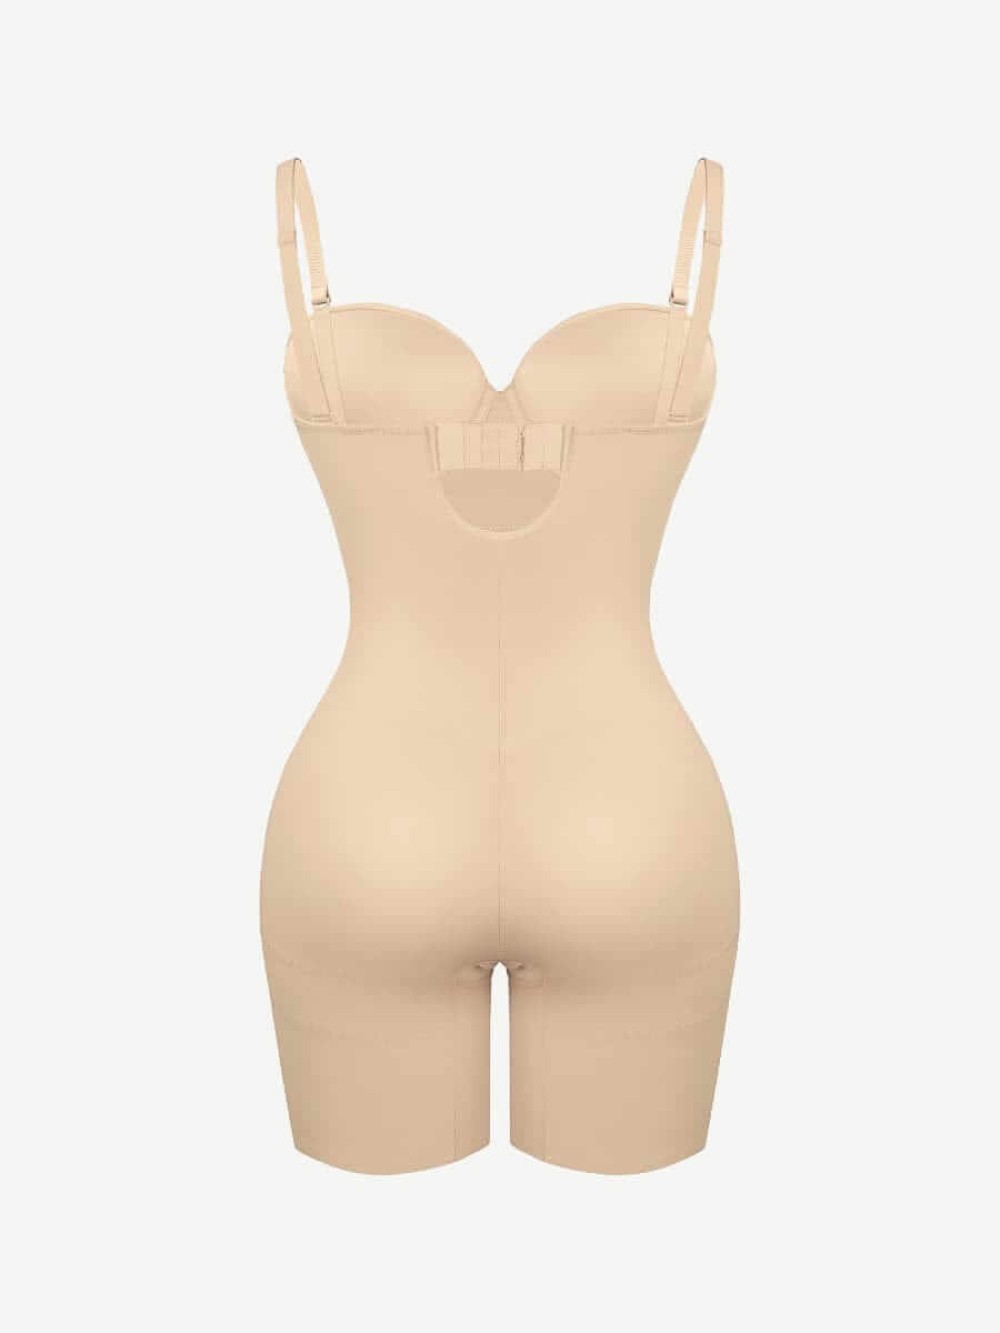 Back Smoothing Underwire Cup Push Up Bra Strapless Shortie Bodysuit